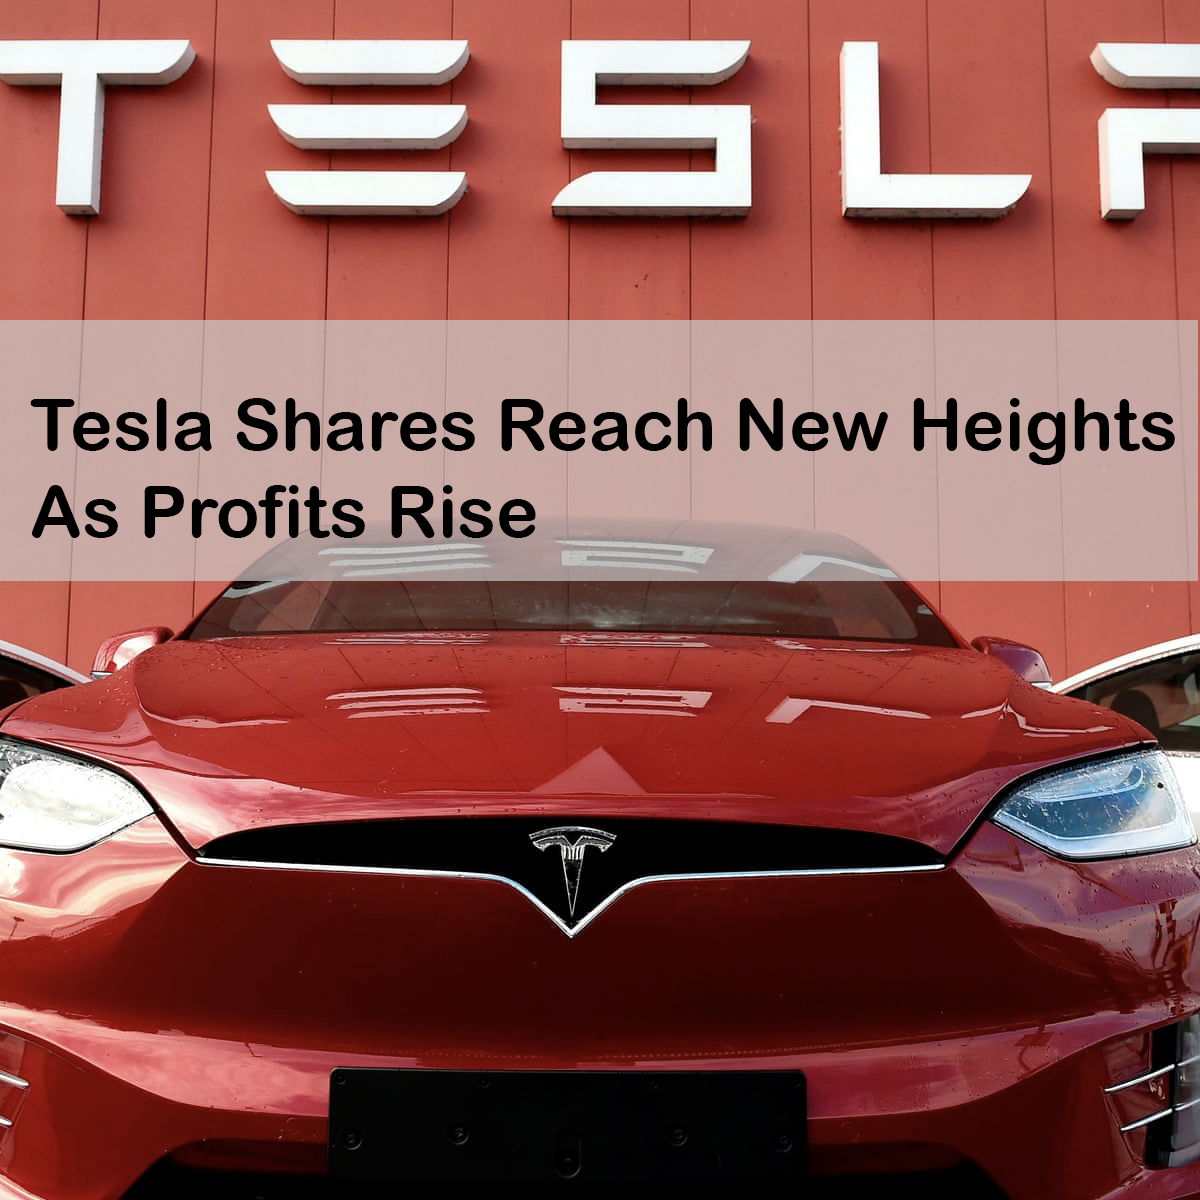 Tesla Shares Reach New Heights As Profits Rise